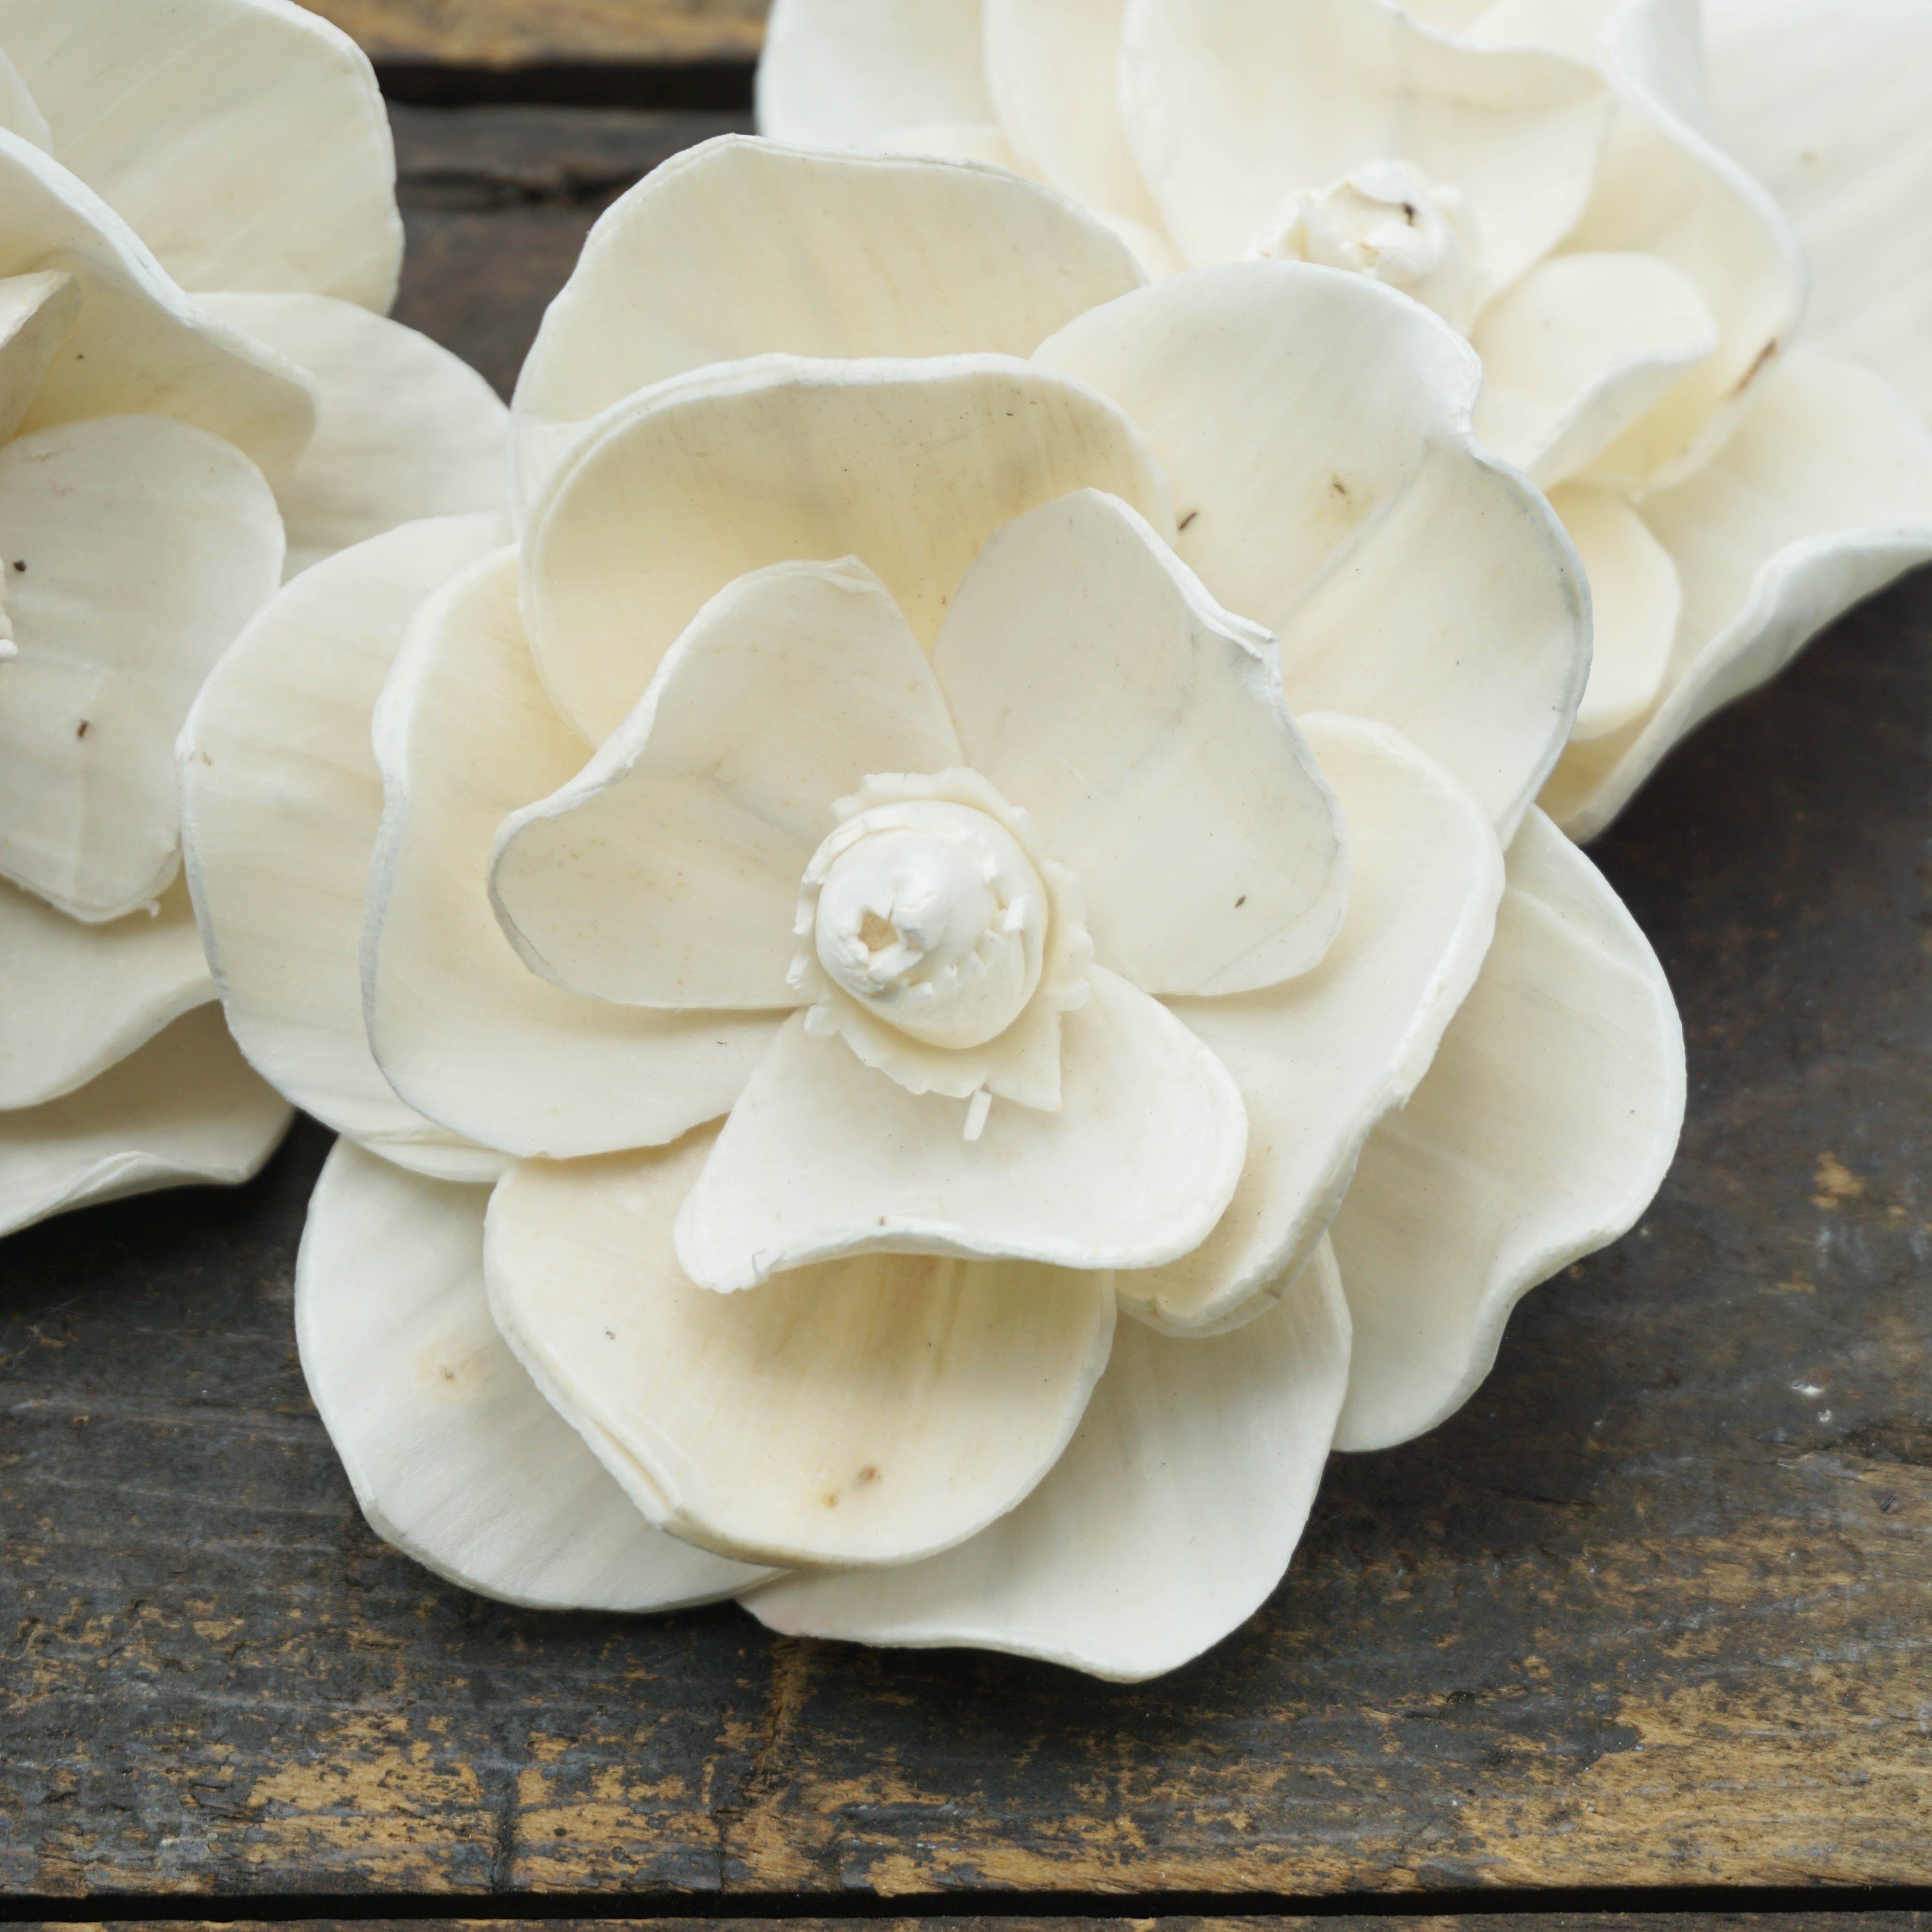 Magnolia Flower  - set of 12 - 4 inches _sola_wood_flowers